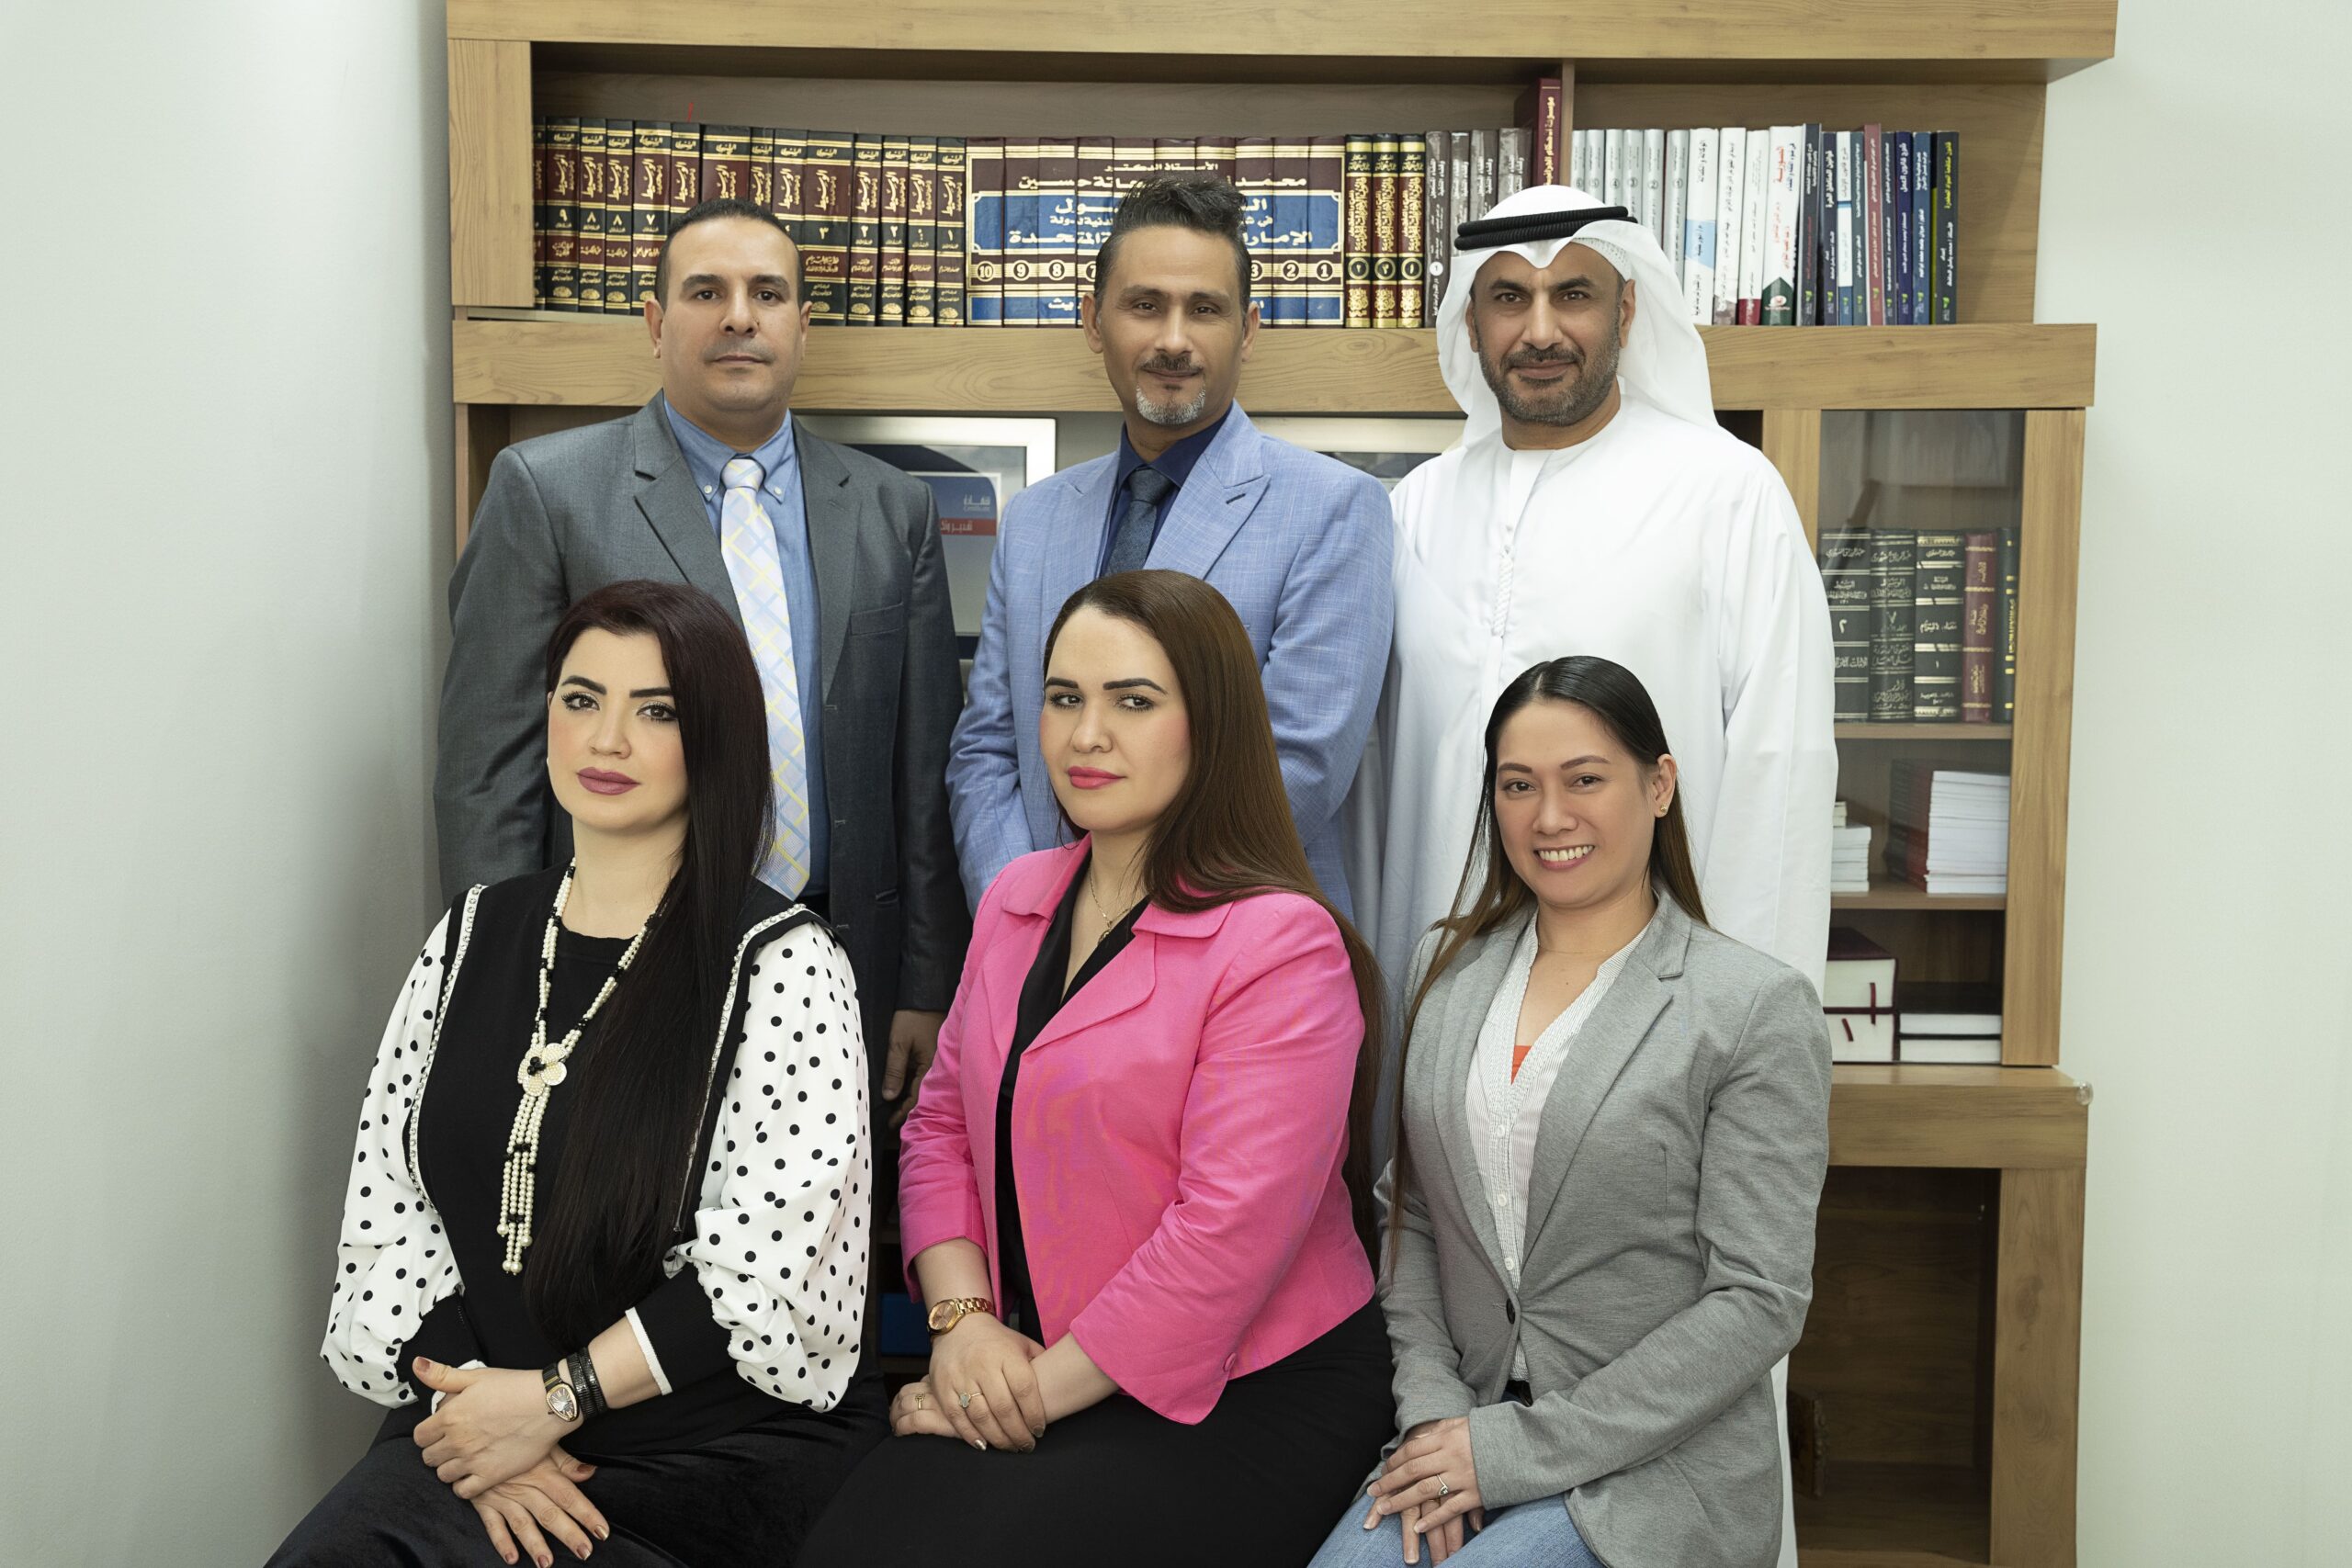 S & S Lawyers is a leading law firm consisting of experienced lawyers and advocates in Sharjah that provides high quality legal services to groups and individuals to help them with legal matters, including arbitration, civil, criminal law and crimes, real estate, personal status, and as well free legal consultation. محامي الشارقة,المكاتب القانونية,شركة محاماة,المحامون,مكتب الشارقة القانوني,شركة محاماة في دولة الإمارات العربية المتحدة,مكتب قانوني في دولة الإمارات العربية المتحدة,الاستشارة القانونية,استشارة قانونية مجانية,المحامي الجنائي,مستشارين قانونيين,خدمات قانونية,خدمات قانونية,محامون عقاريون,محامي احوال شخصية,محامو العمل,محامون مدنيون,المحامين الجنائيين,محامو الملكية الفكرية,